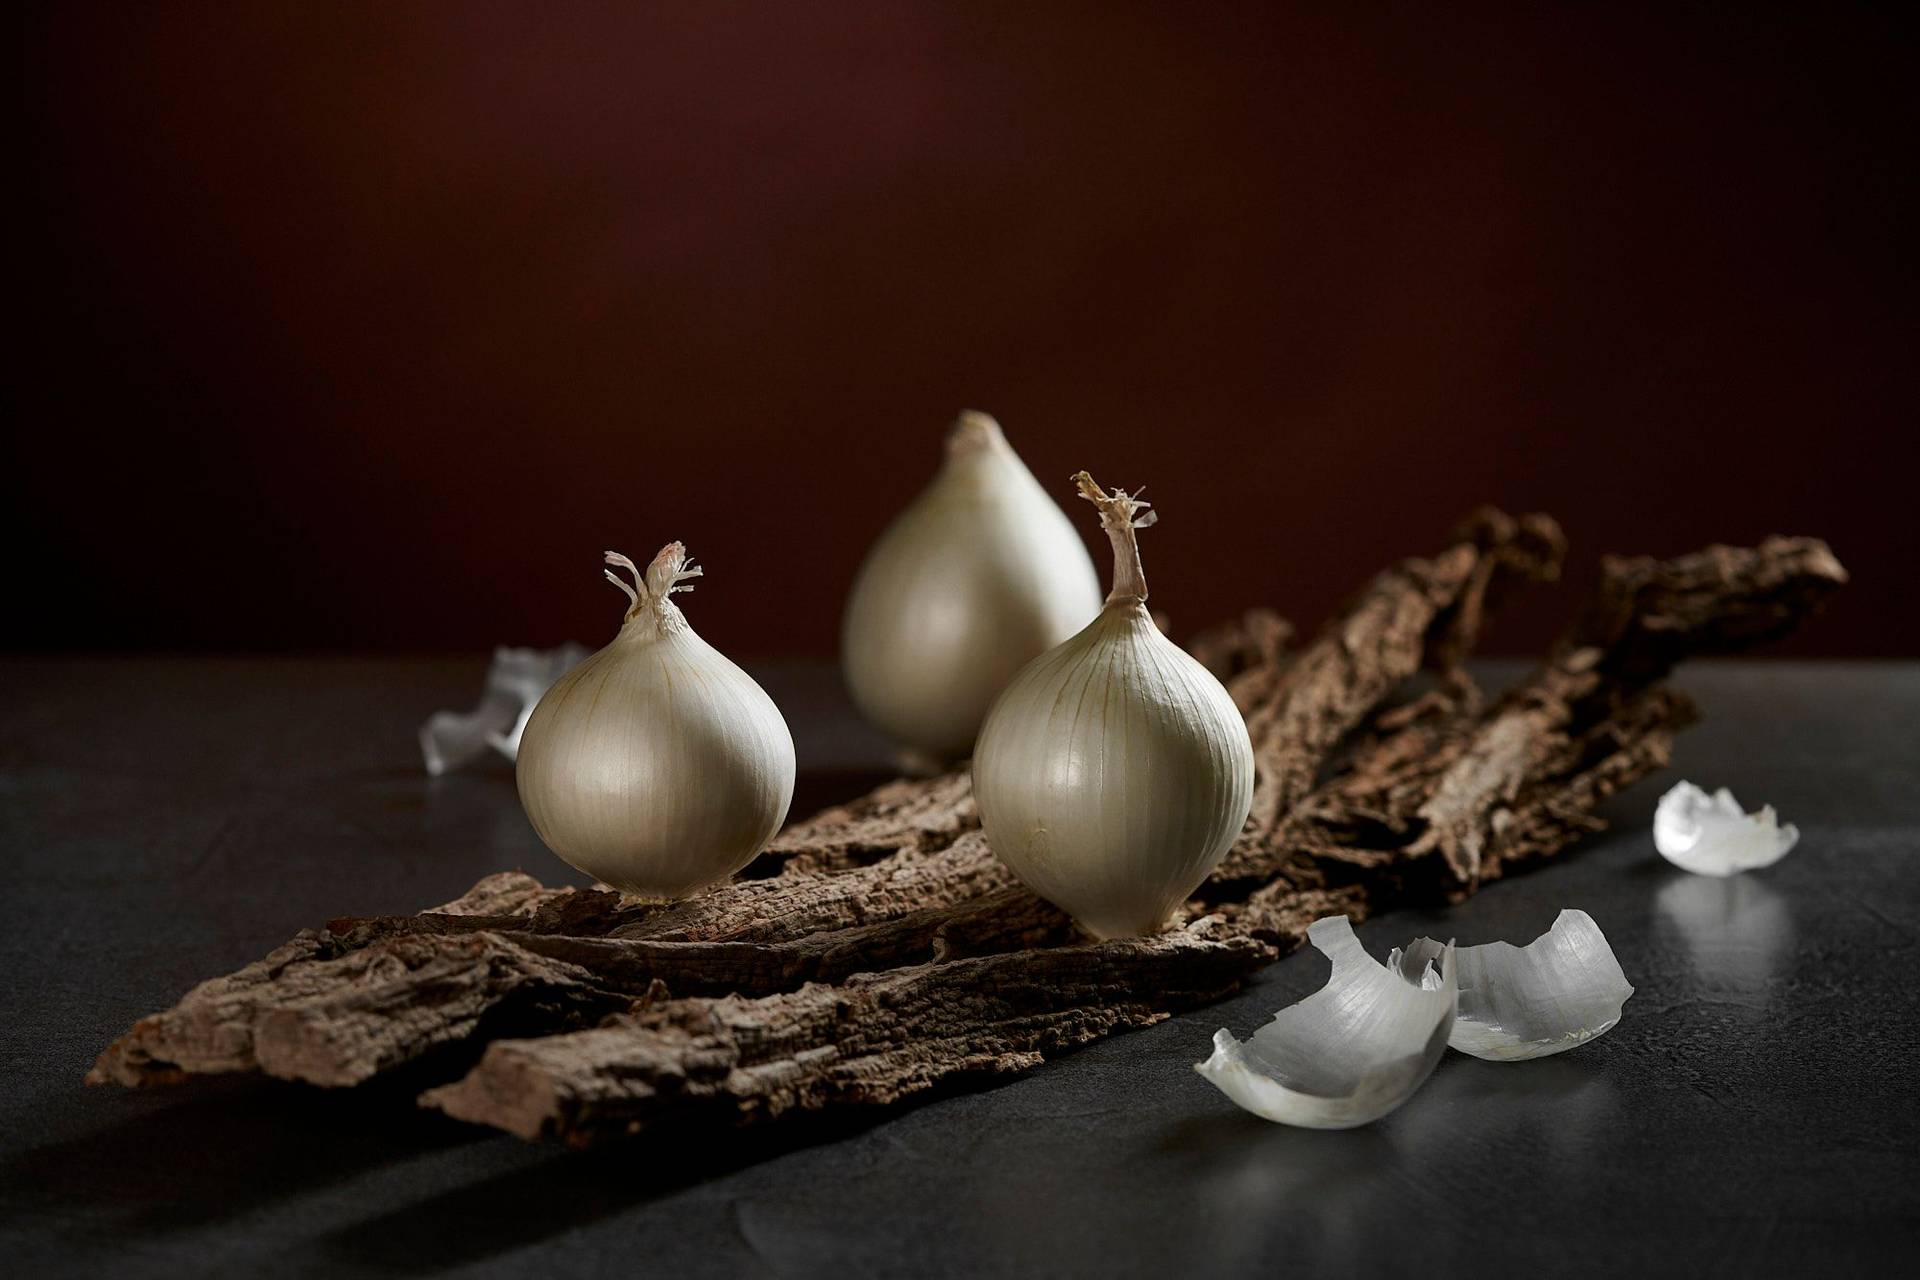 white onions on wood with brown background